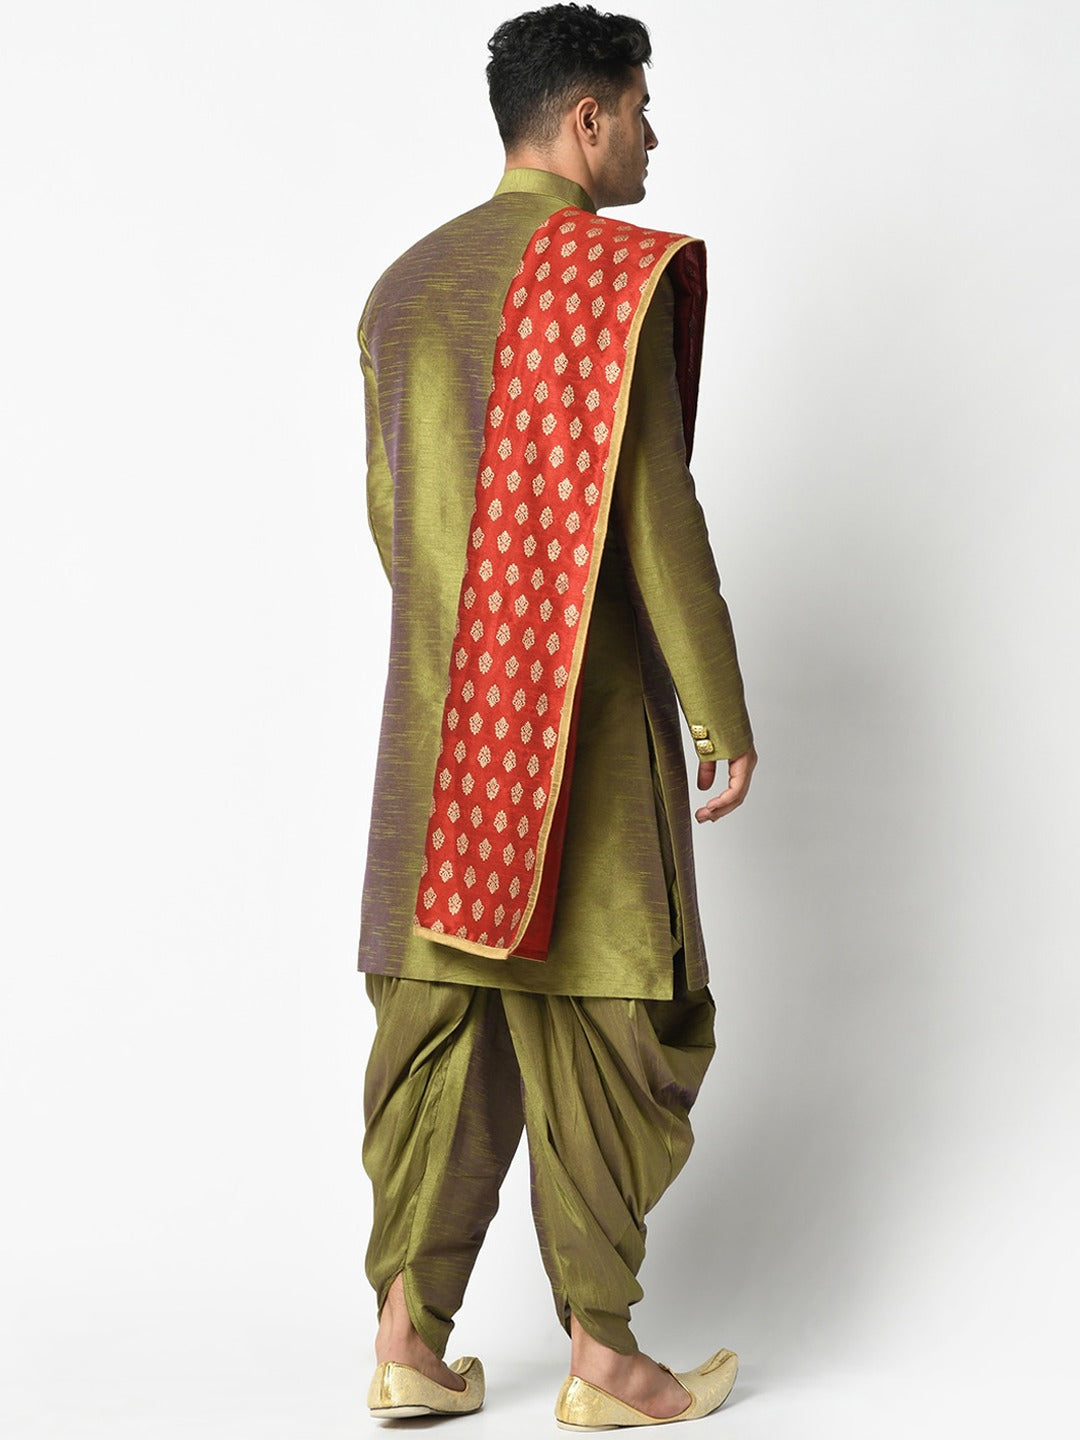 Olive Sherwani Set Indian Clothing in Denver, CO, Aurora, CO, Boulder, CO, Fort Collins, CO, Colorado Springs, CO, Parker, CO, Highlands Ranch, CO, Cherry Creek, CO, Centennial, CO, and Longmont, CO. NATIONWIDE SHIPPING USA- India Fashion X